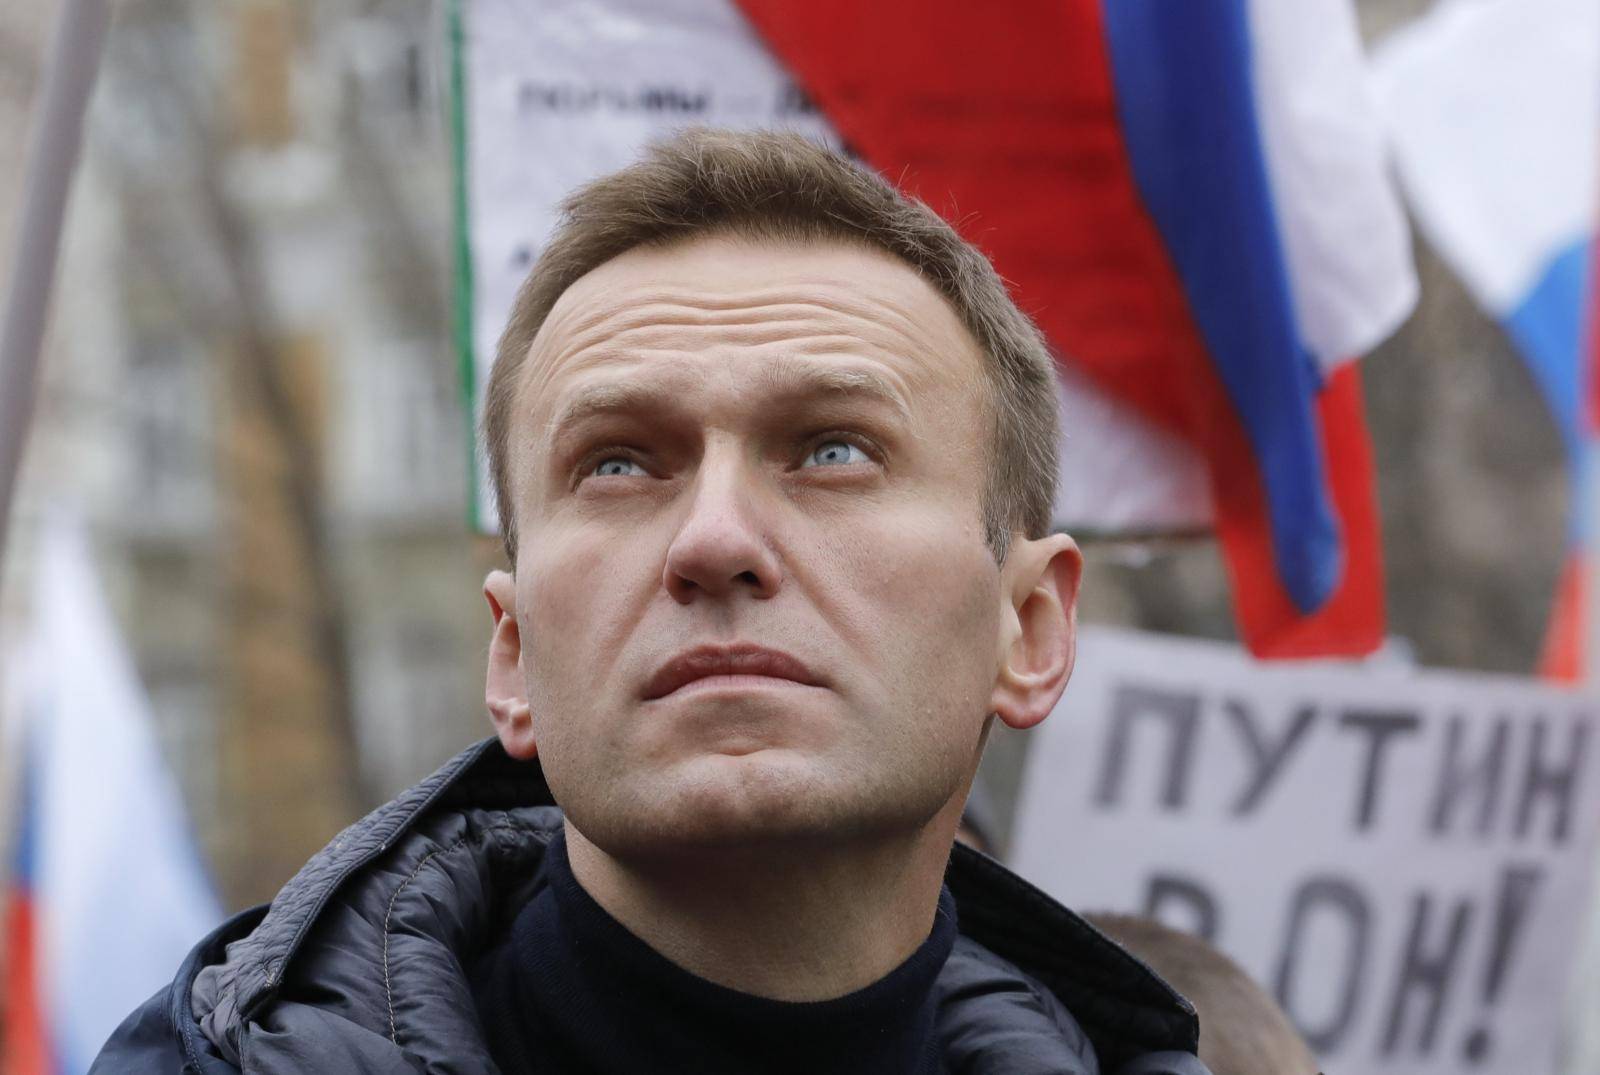 Russian opposition leader Alexei Navalny attends a rally in memory of politician Boris Nemtsov in Moscow